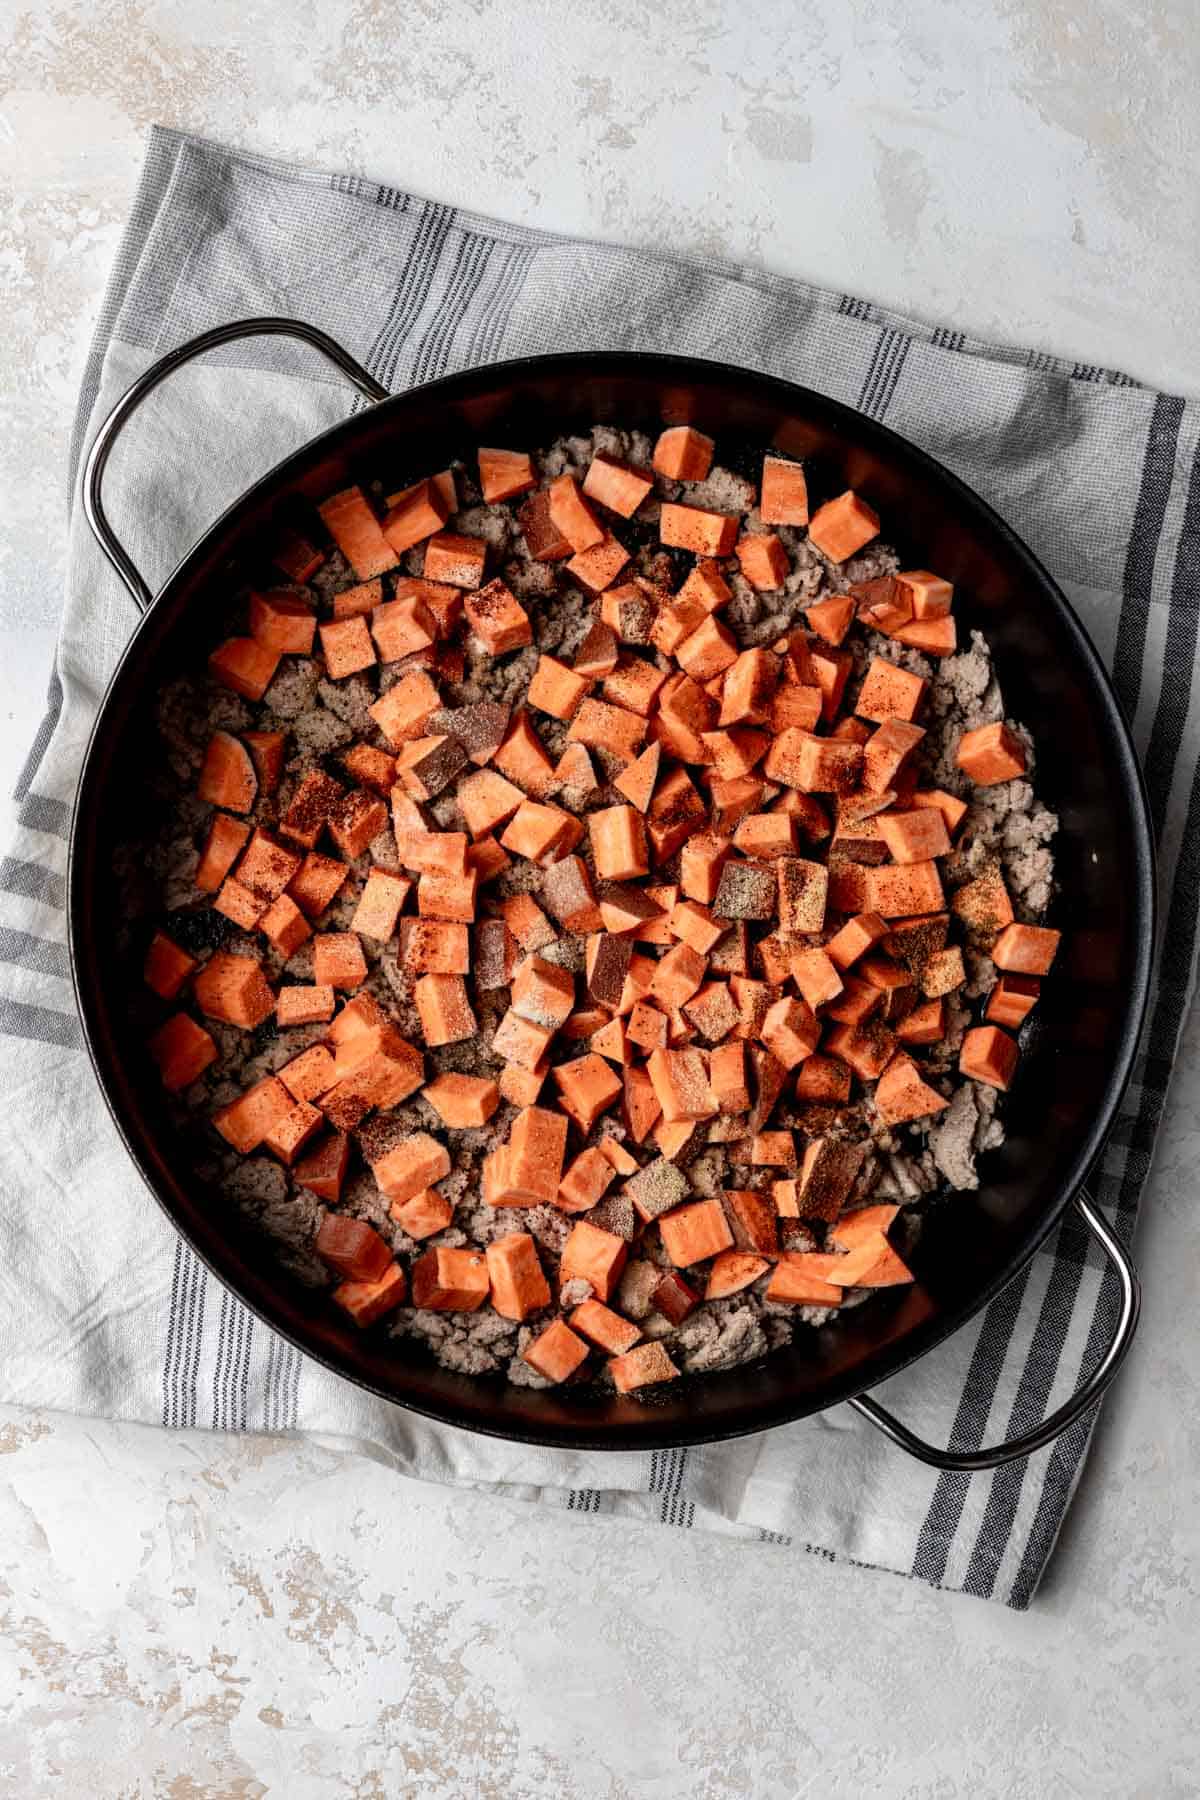 Raw sweet potatoes combined with ground turkey in a skillet.